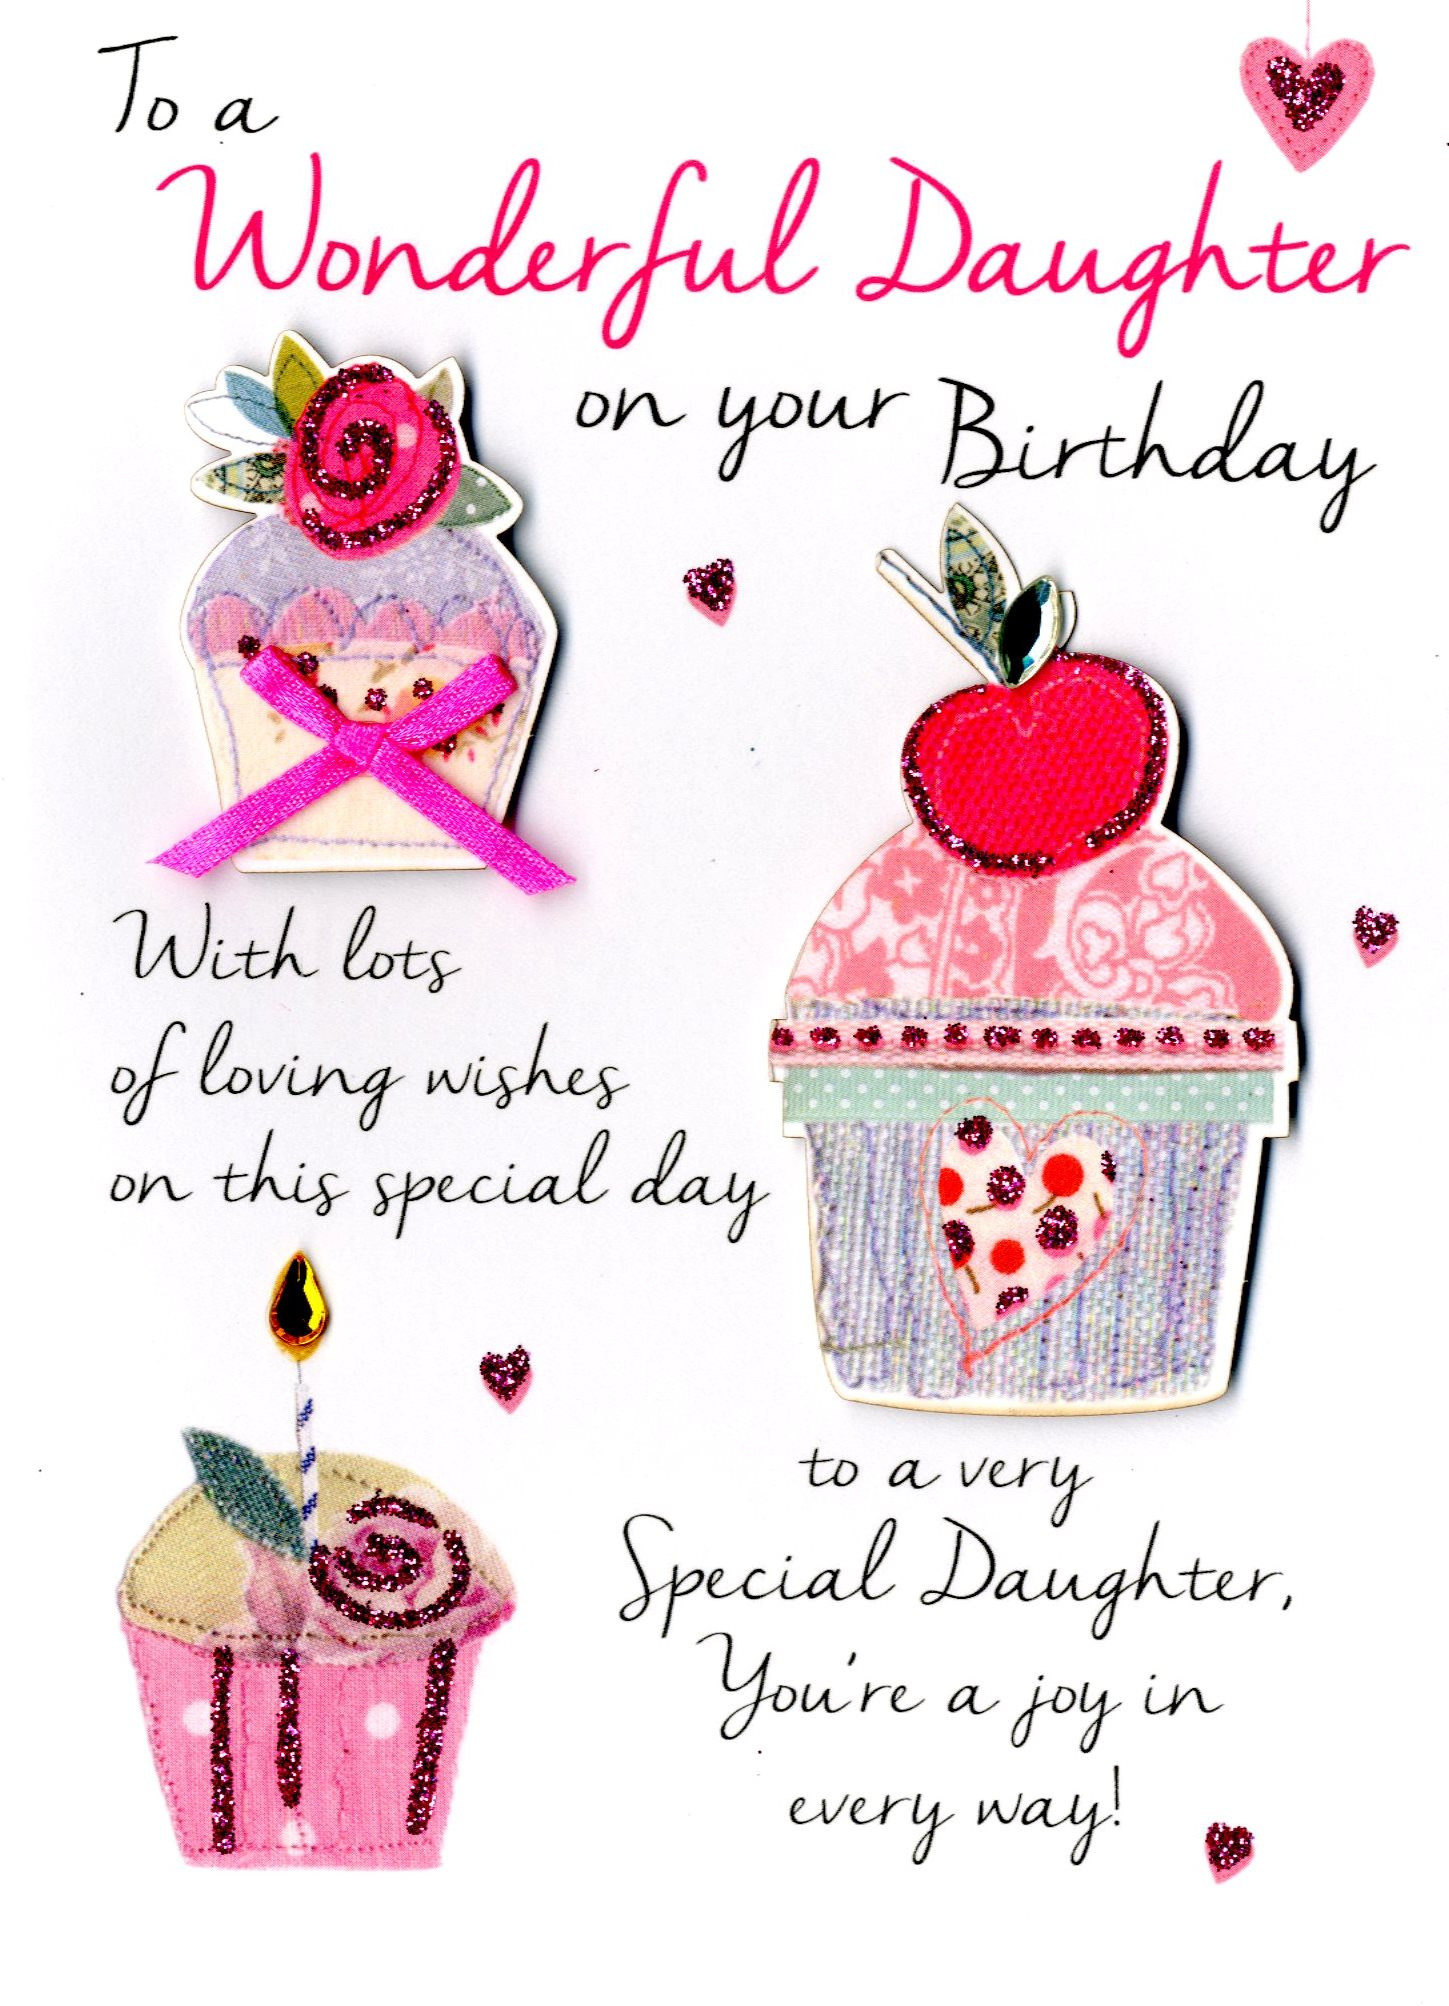 top-22-free-birthday-cards-for-daughter-home-family-style-and-art-ideas